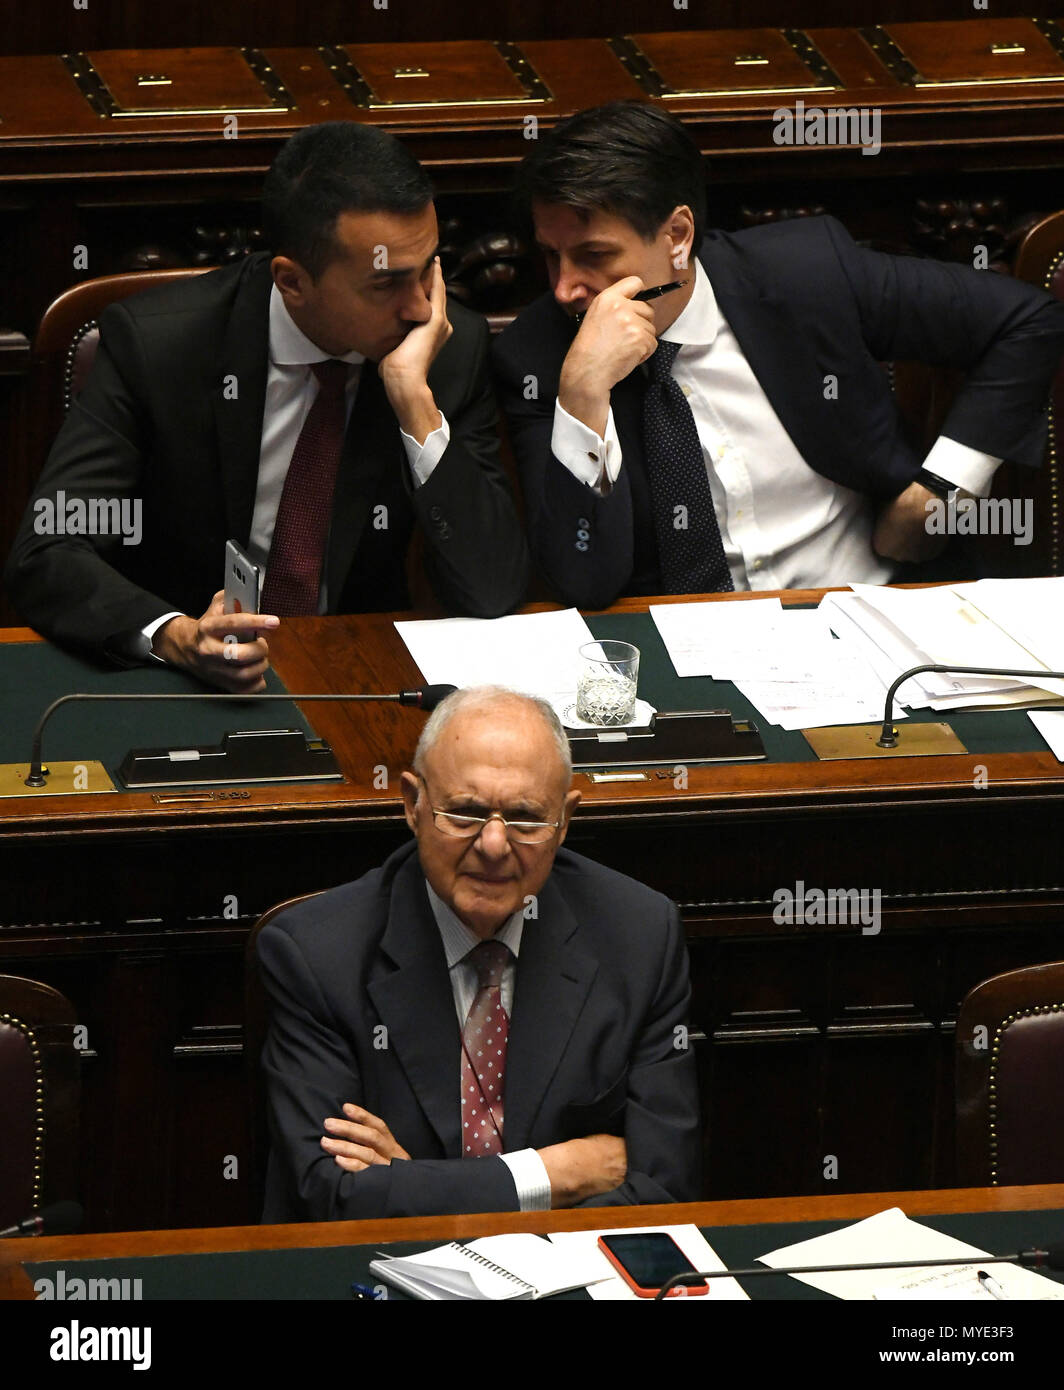 Rome, Italy. 6th June, 2018. Italian Prime Minister Giuseppe Conte (R, Top), Economic Development and Labour Minister Luigi Di Maio (L, Top), and Minister for European Affairs Paolo Savona (Bottom) are seen in the lower house of Italy's parliament in Rome, Italy, on June 6, 2018. The new Italian government cleared its second administrative hurdle on Wednesday, winning a confidence vote in the lower house of Italy's parliament. Credit: Alberto Lingria/Xinhua/Alamy Live News Stock Photo